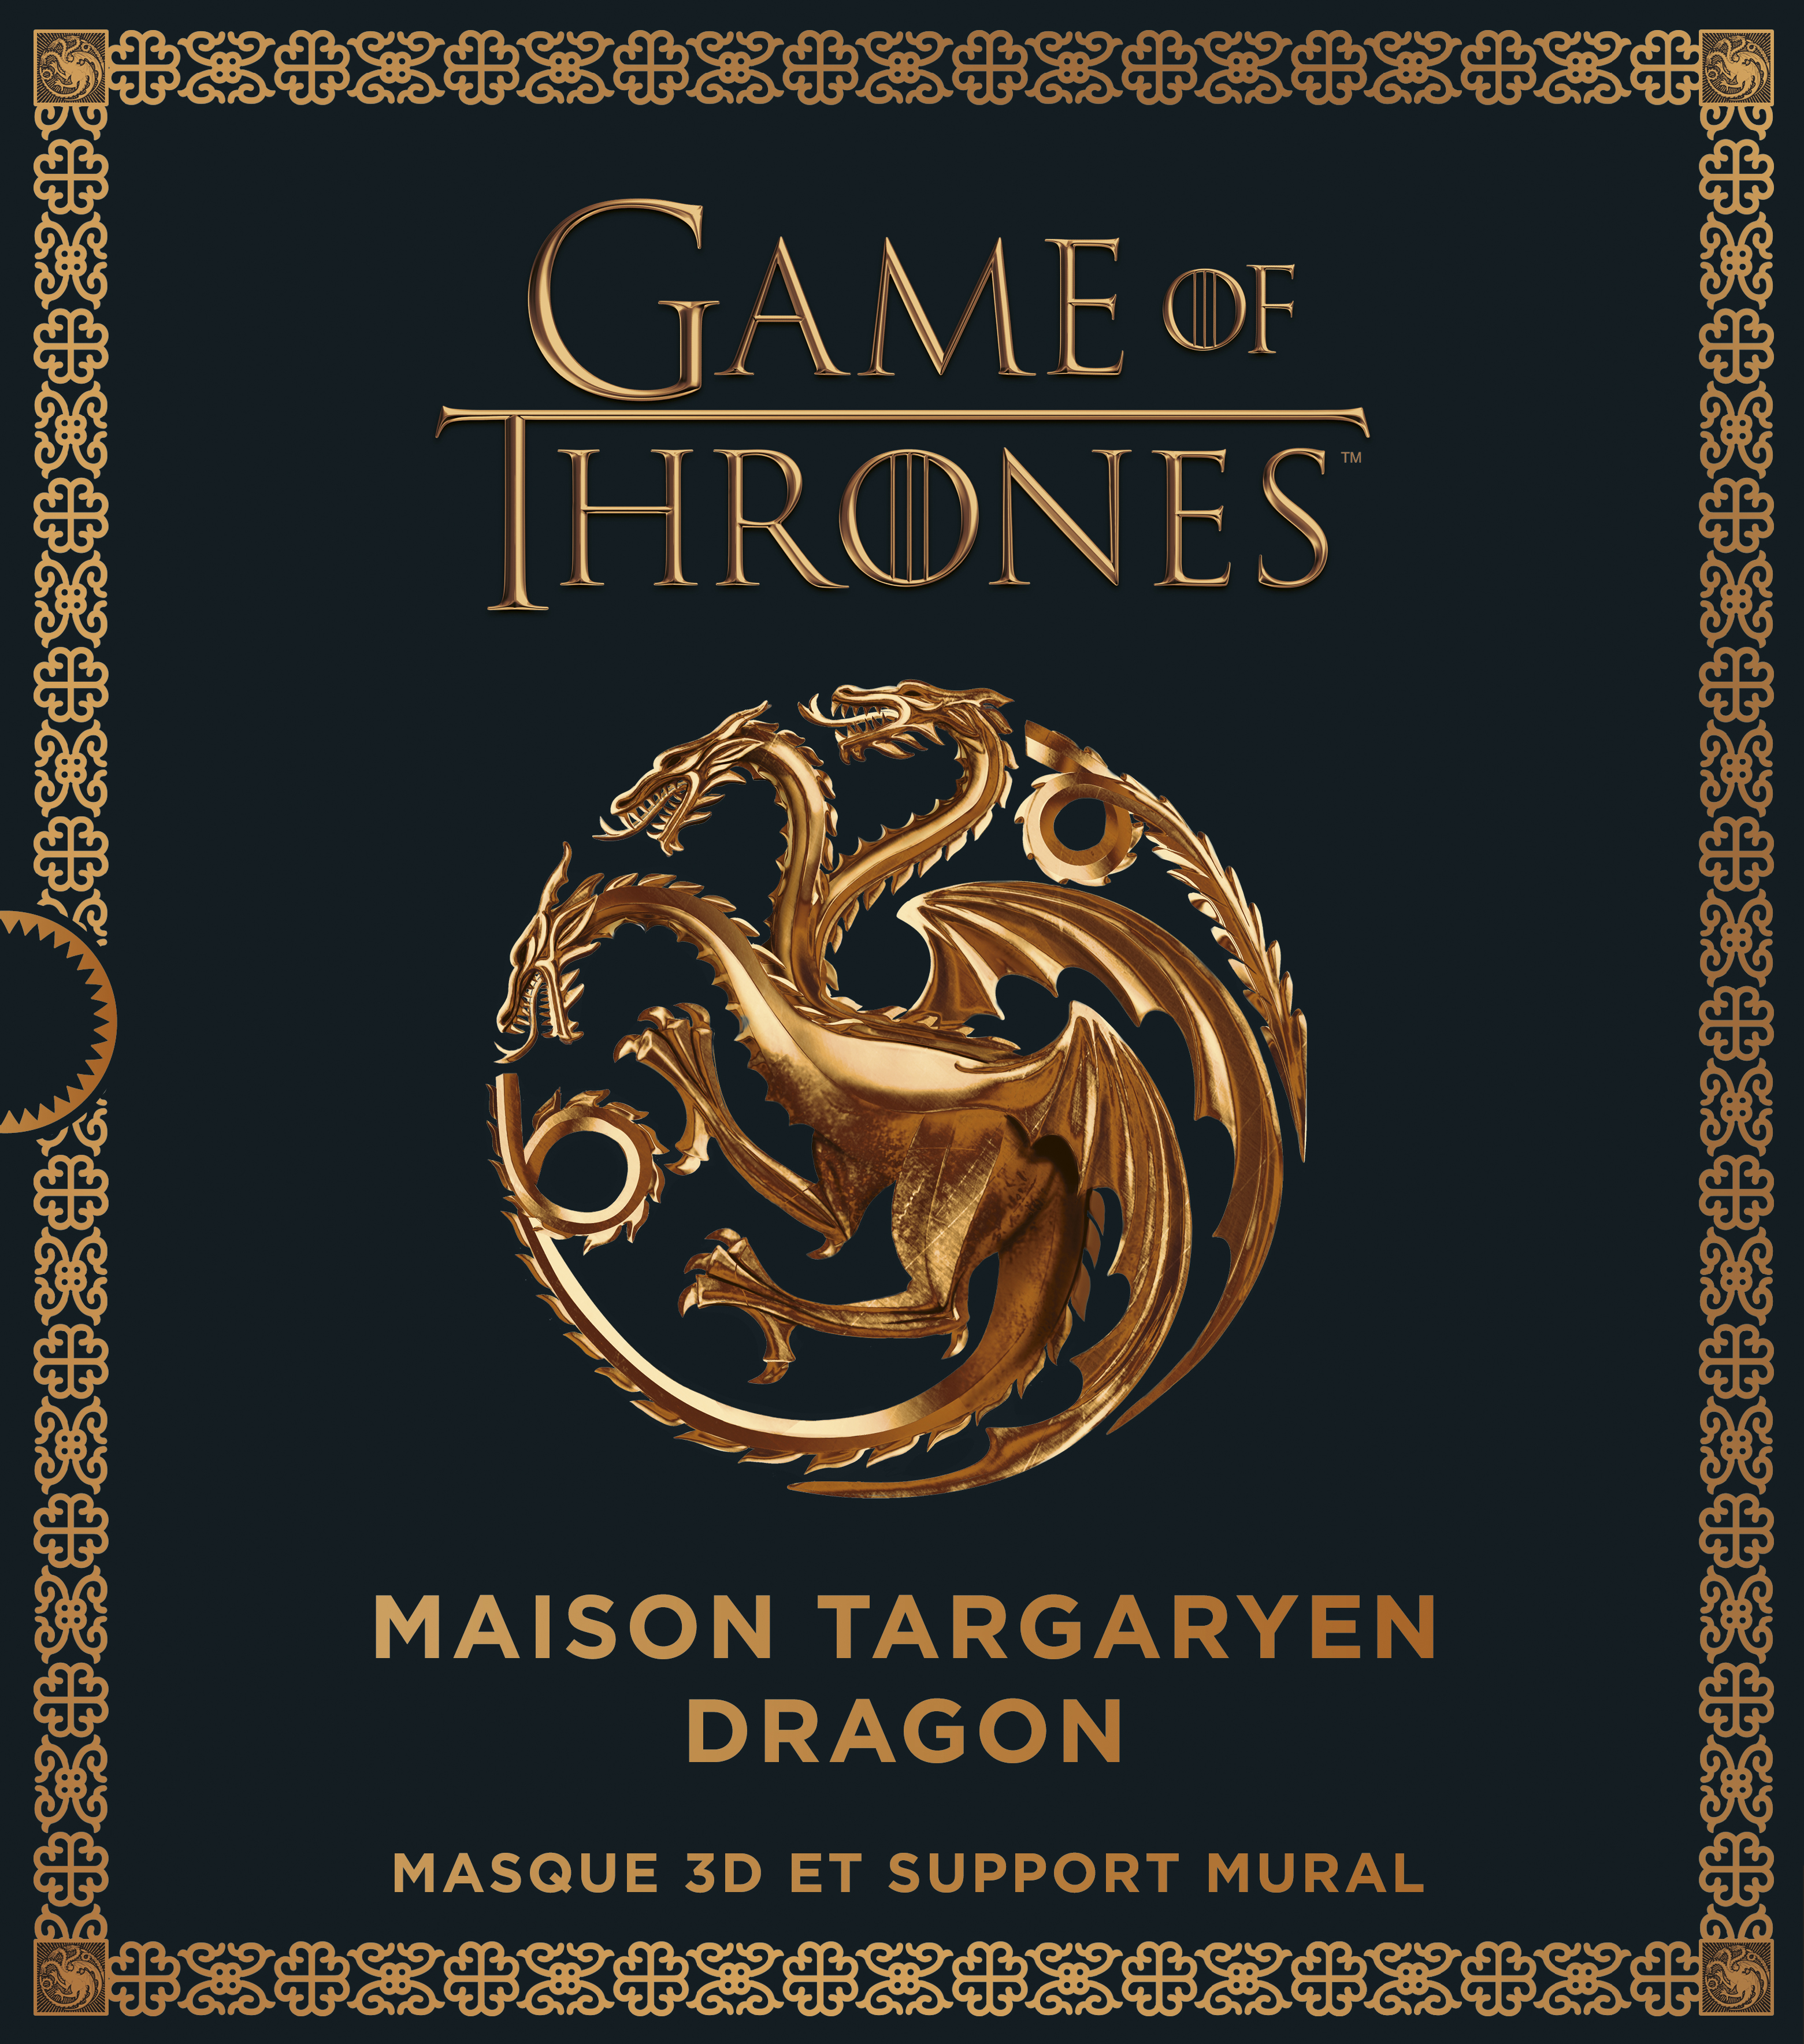 Game of Thrones : Masque et support mural – Tome 2 – Game of Thrones : Maison Targaryen Dragon, masque et support mural - couv